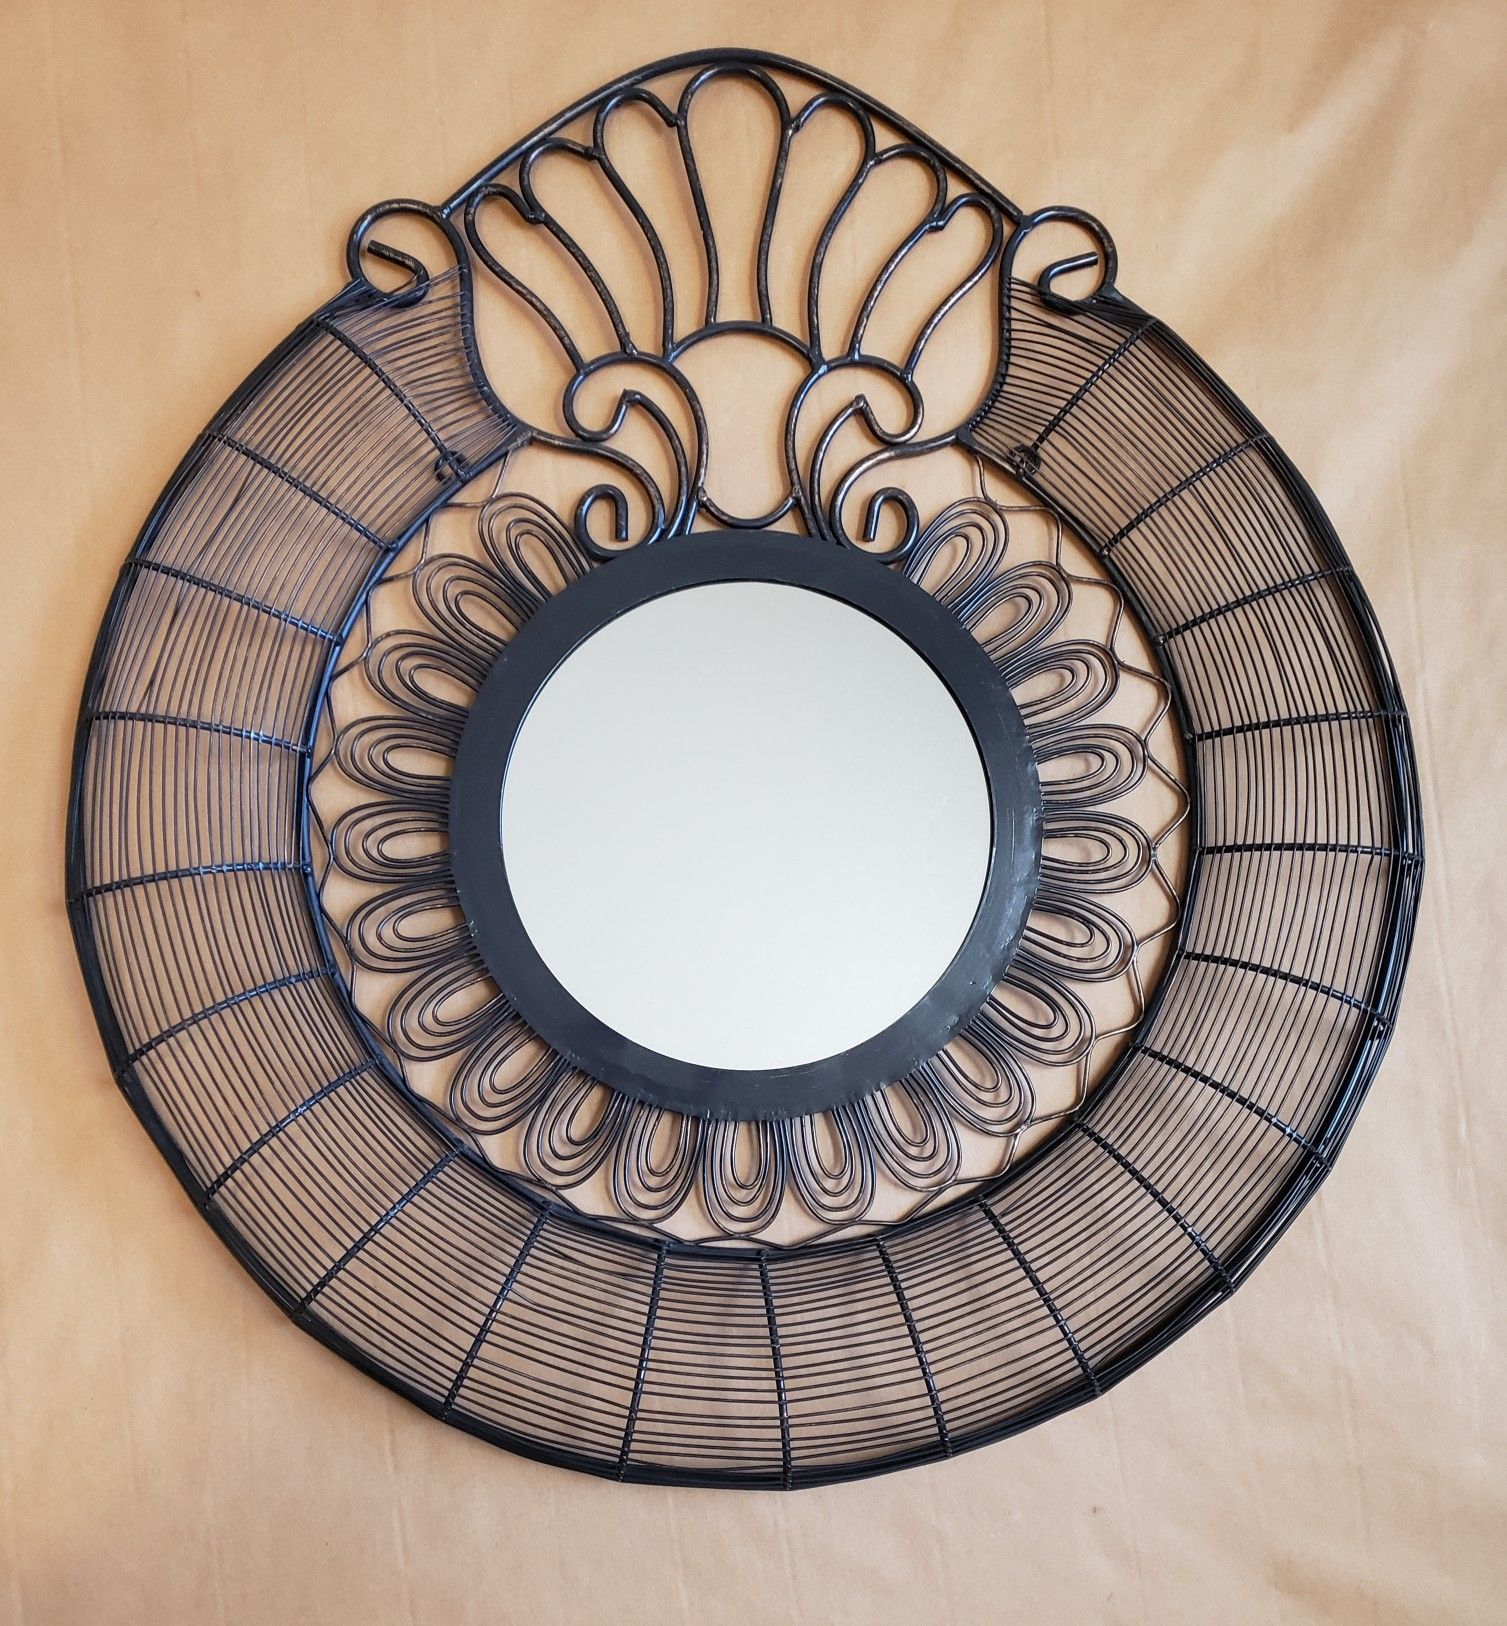 Circular wire wall art with mirror